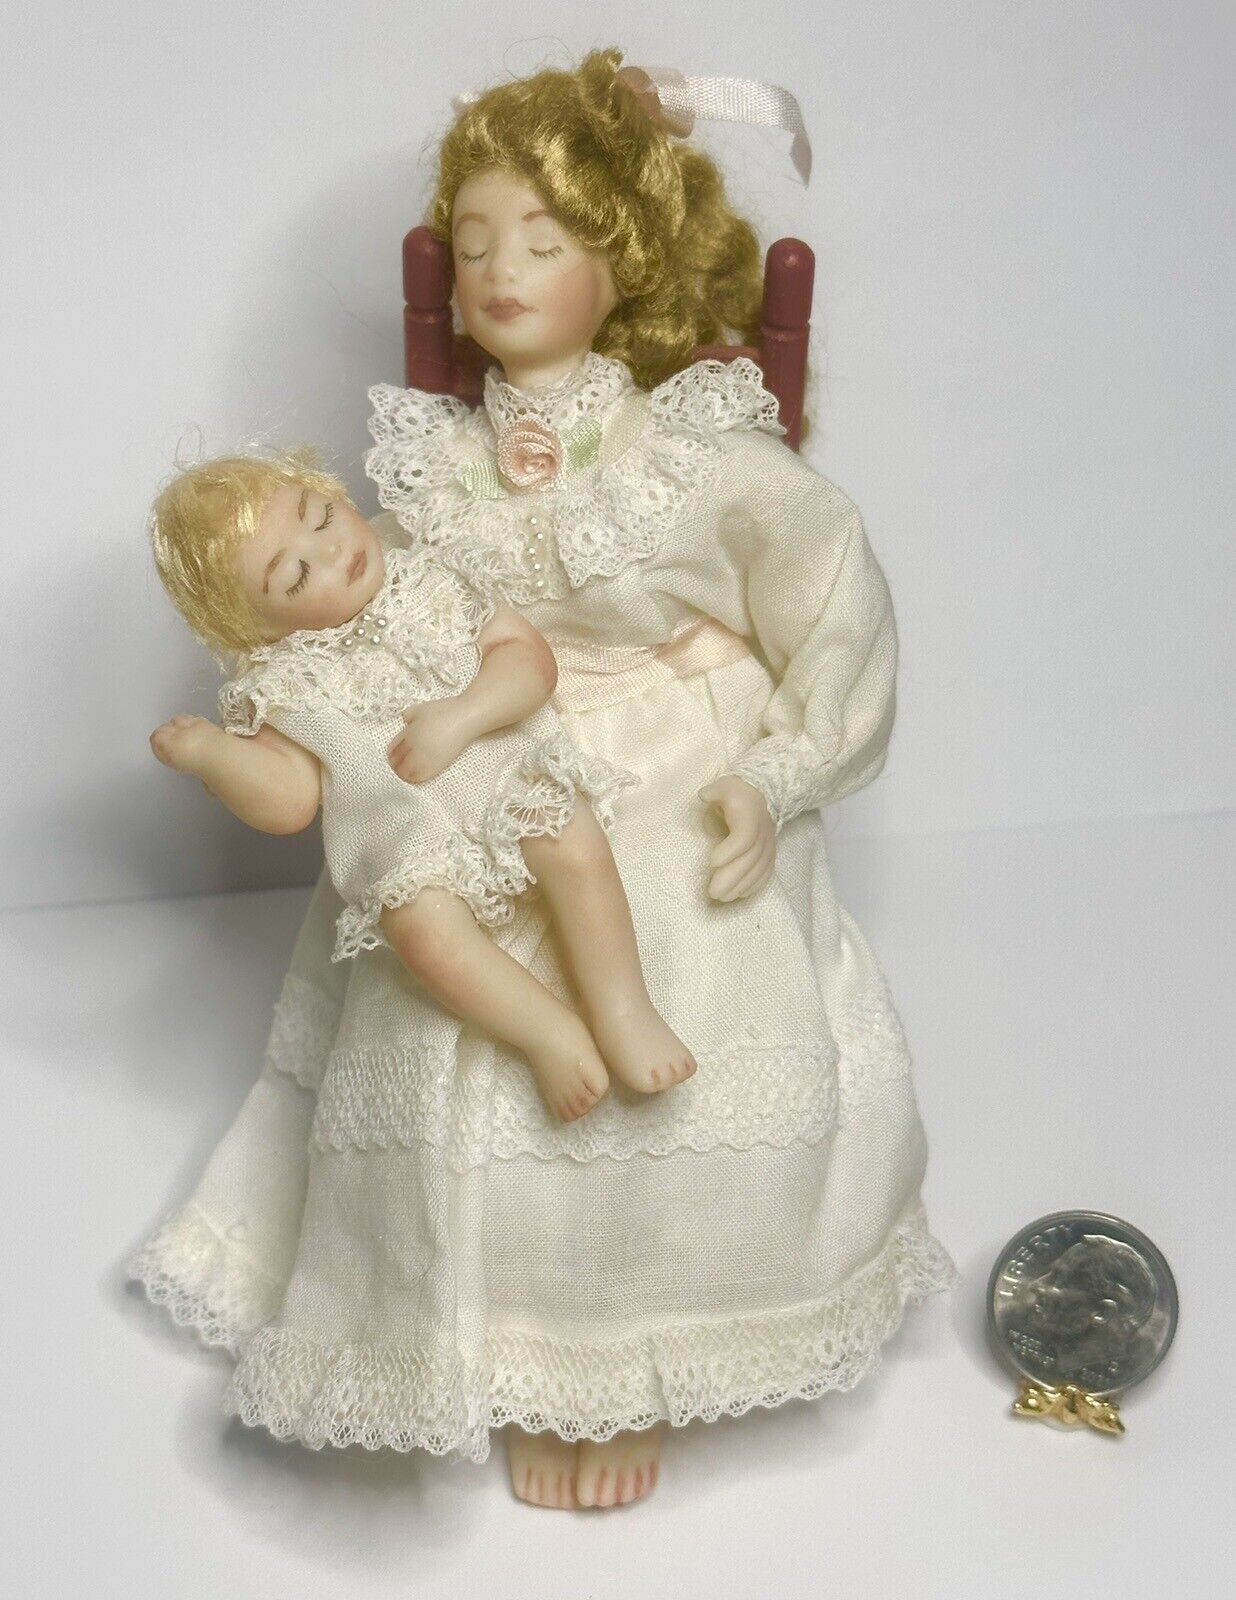 Vintage Dollhouse Artisan Sleeping Woman And Child / Baby Doll 1:12 Miniature